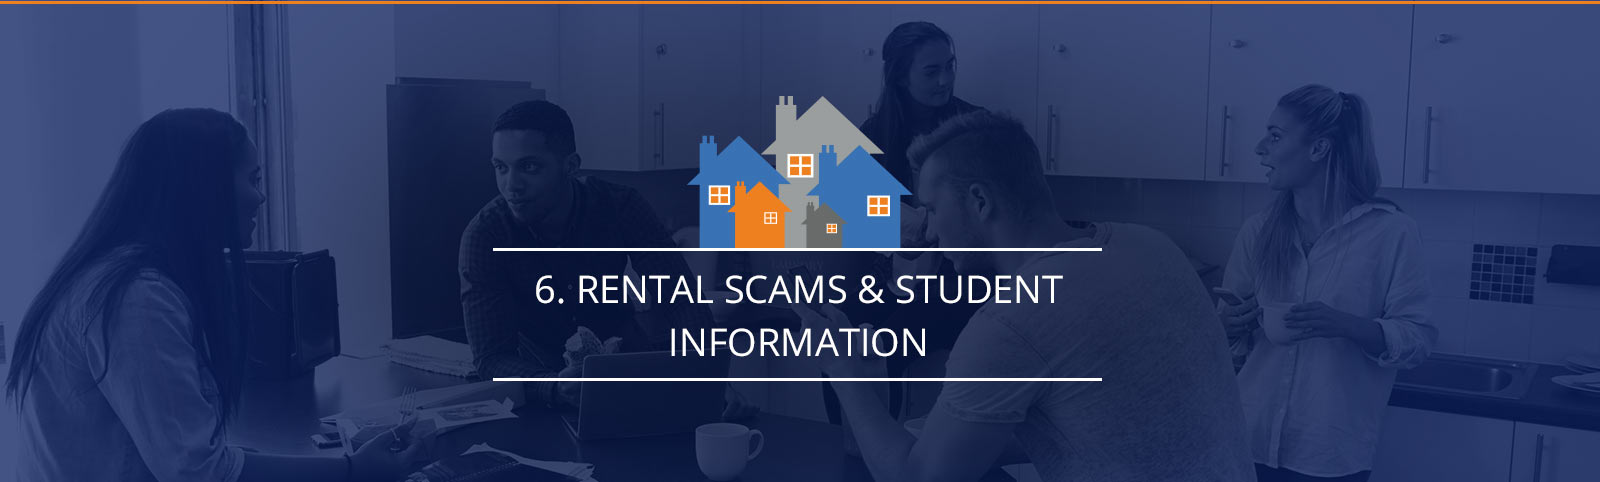 Rental scams and student information